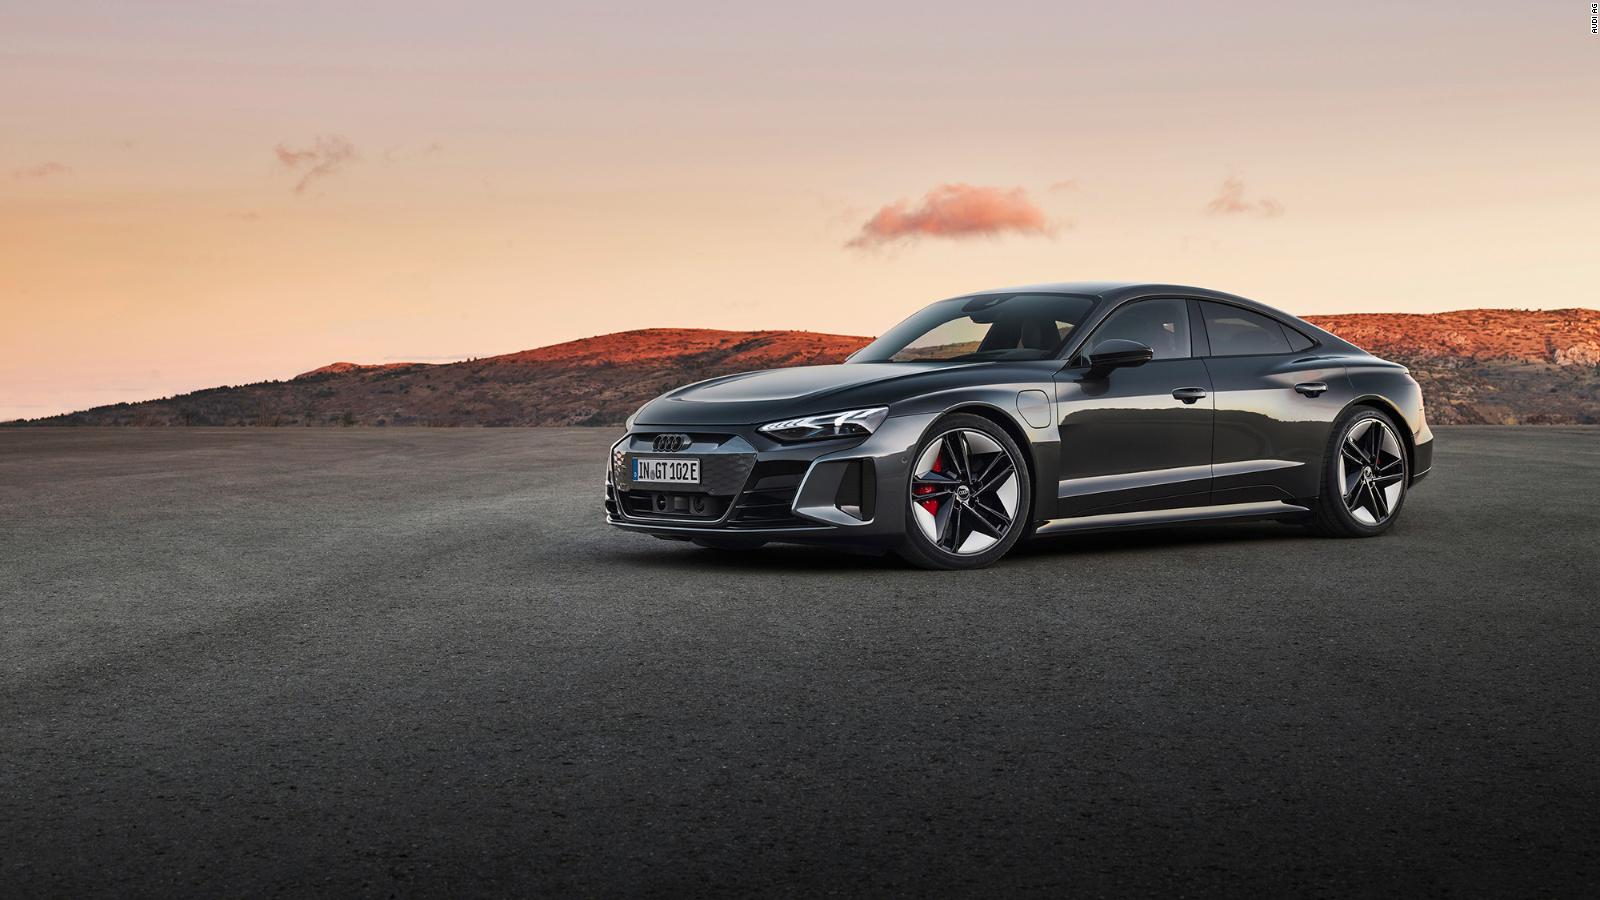 This is the new luxury electric vehicle from Audi